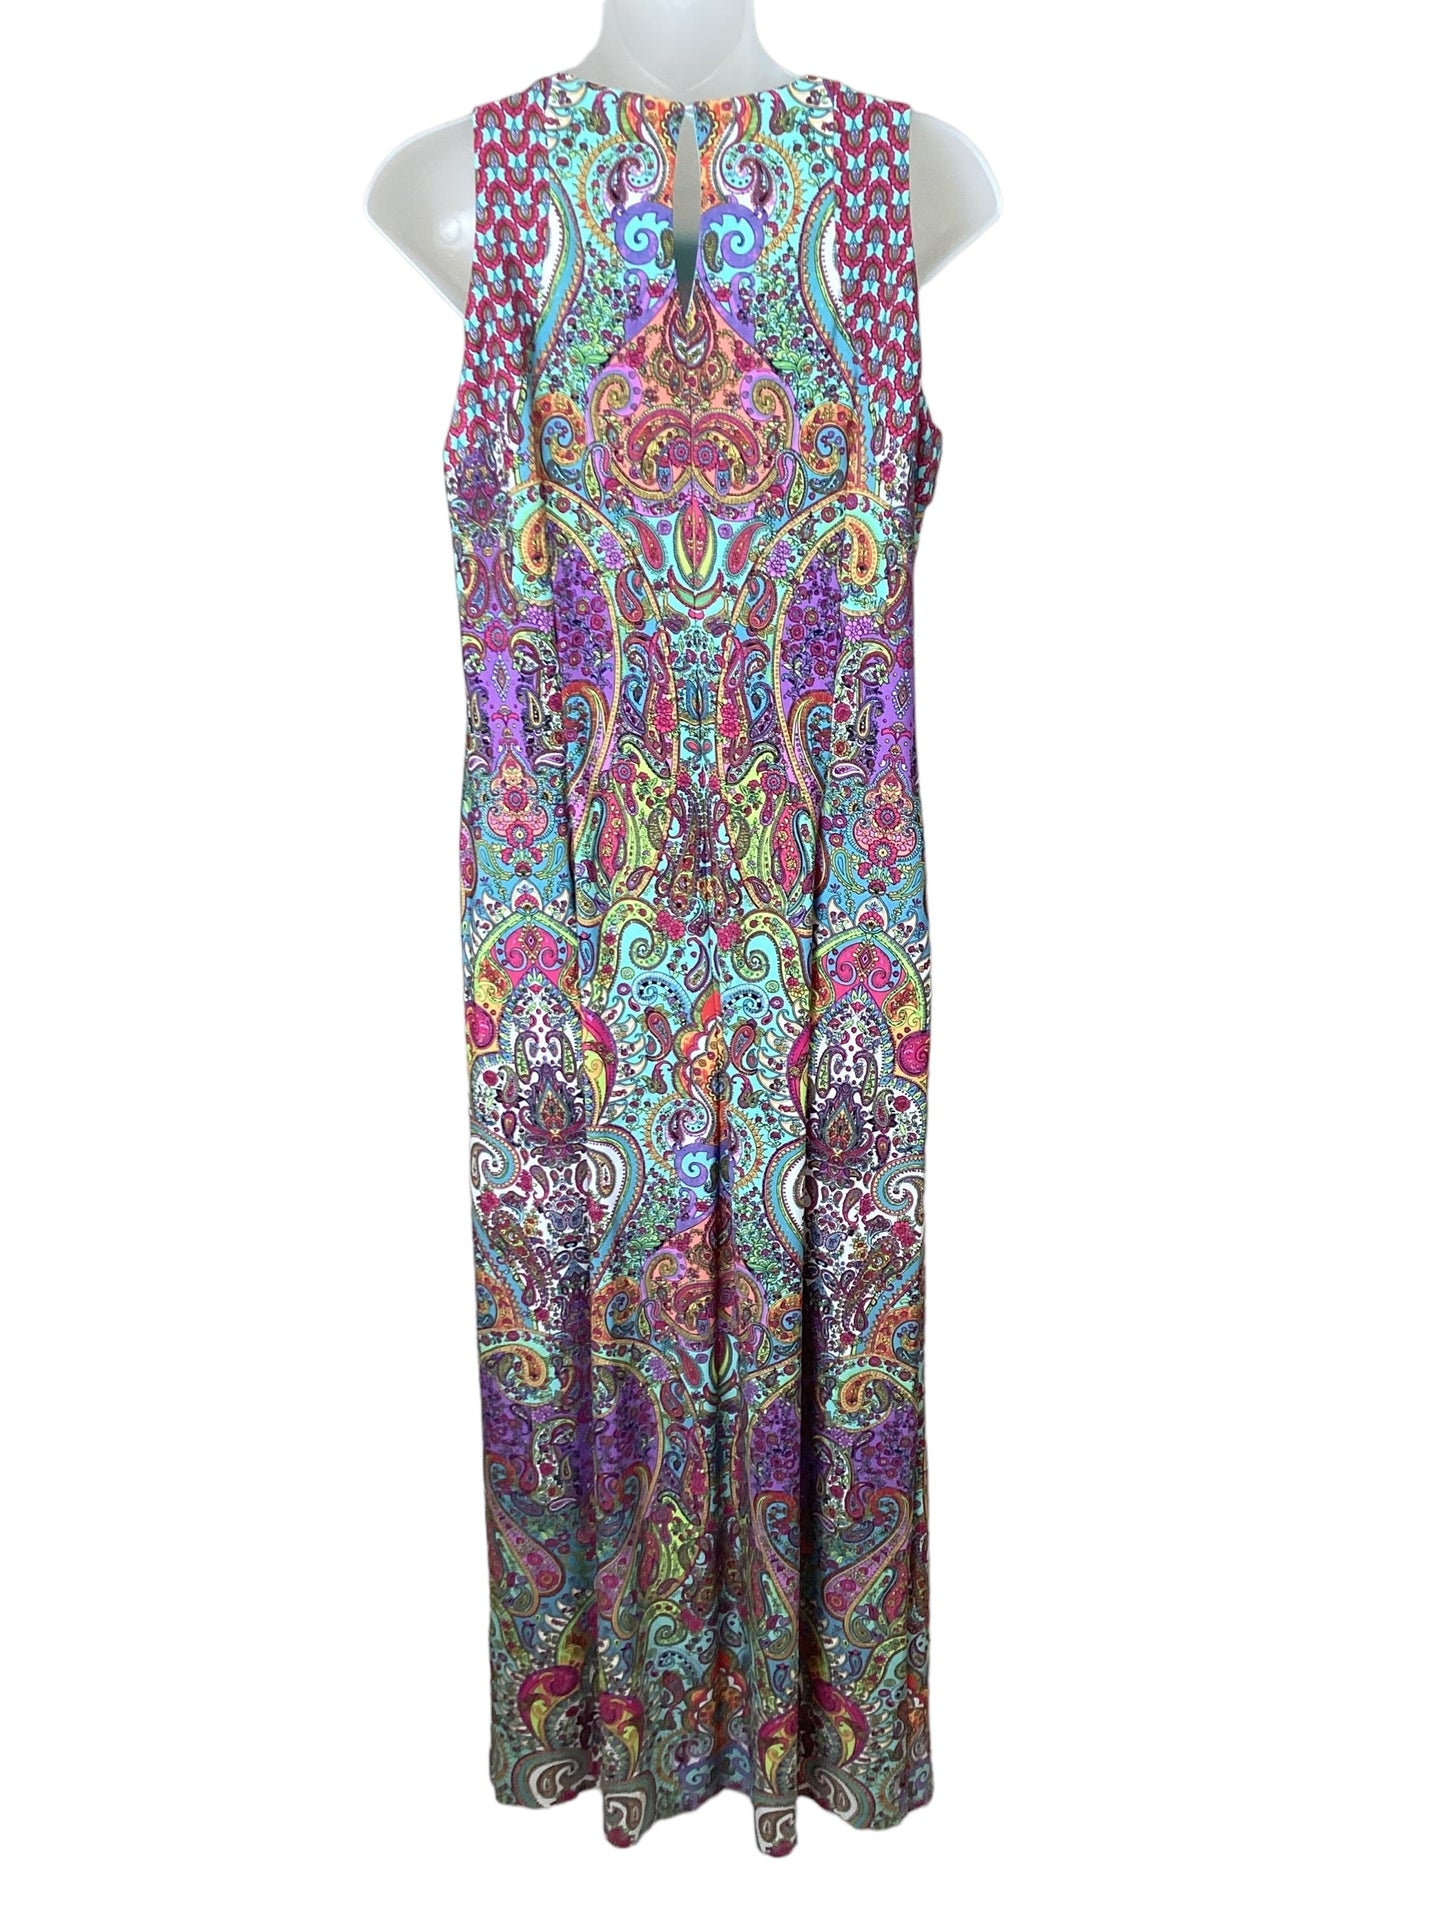 Dress Casual Maxi By London Times  Size: M